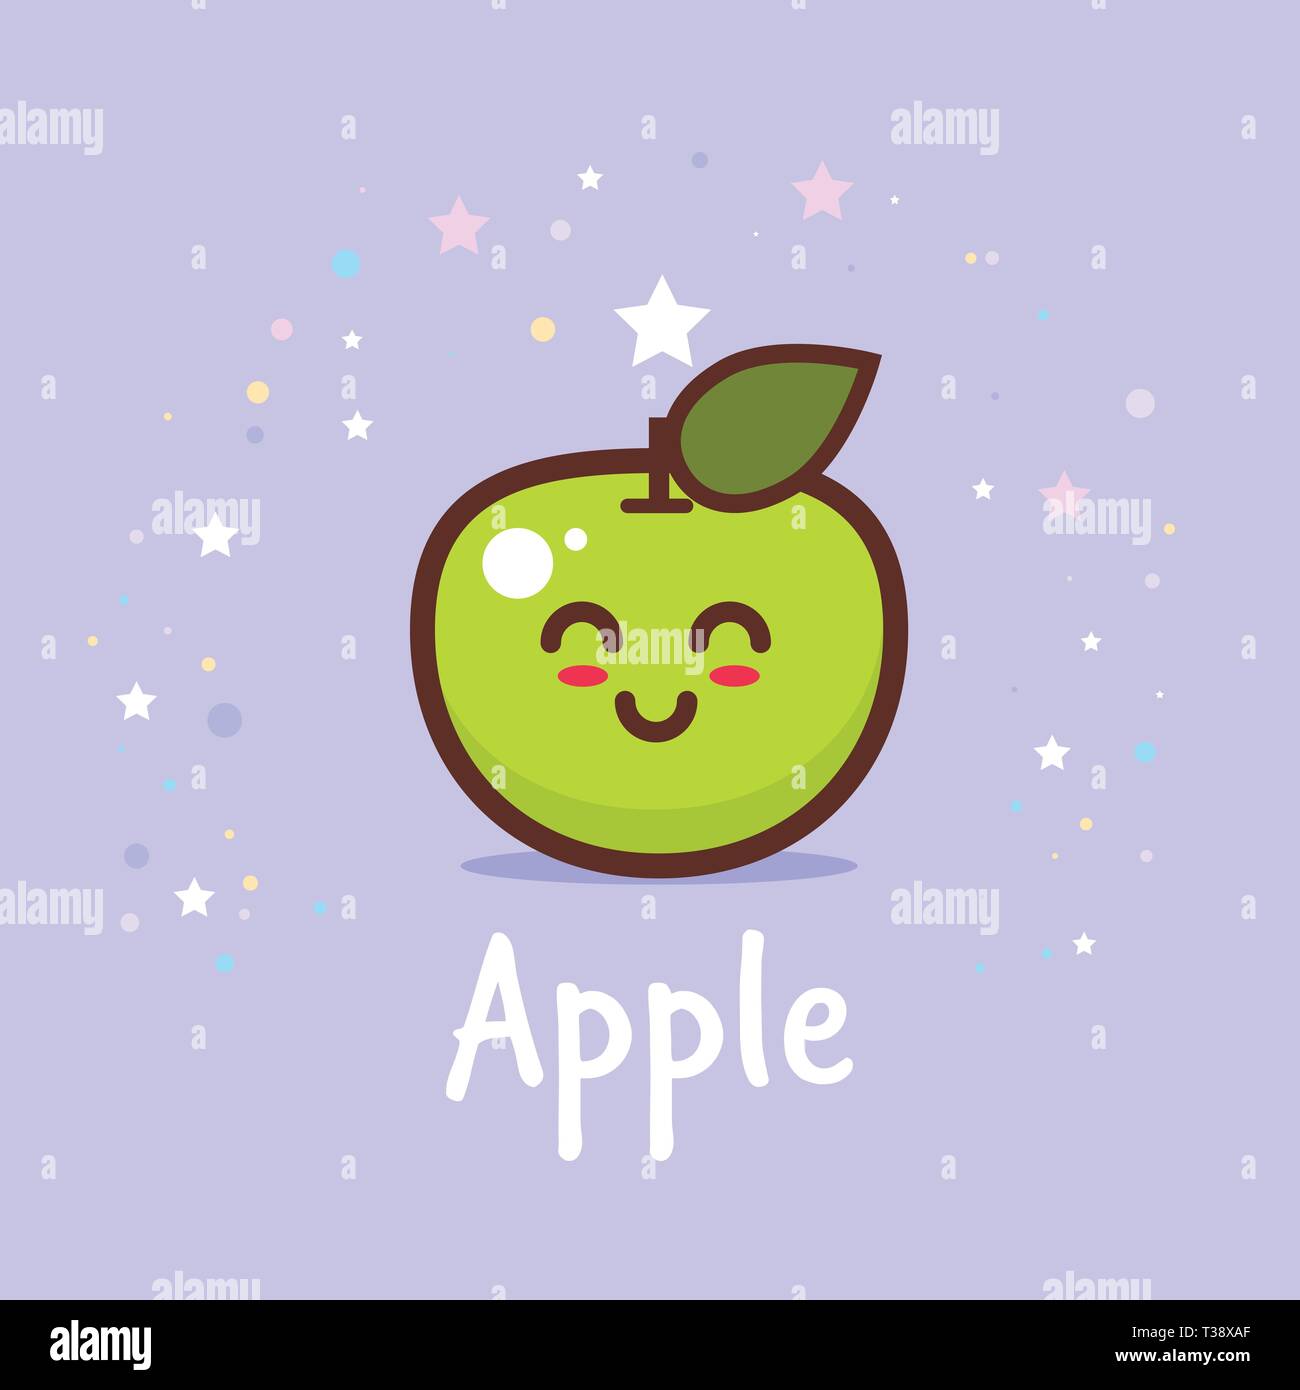 cute green apple cartoon comic character with smiling face happy emoji kawaii style fresh fruit healthy food concept vector illustration Stock Vector